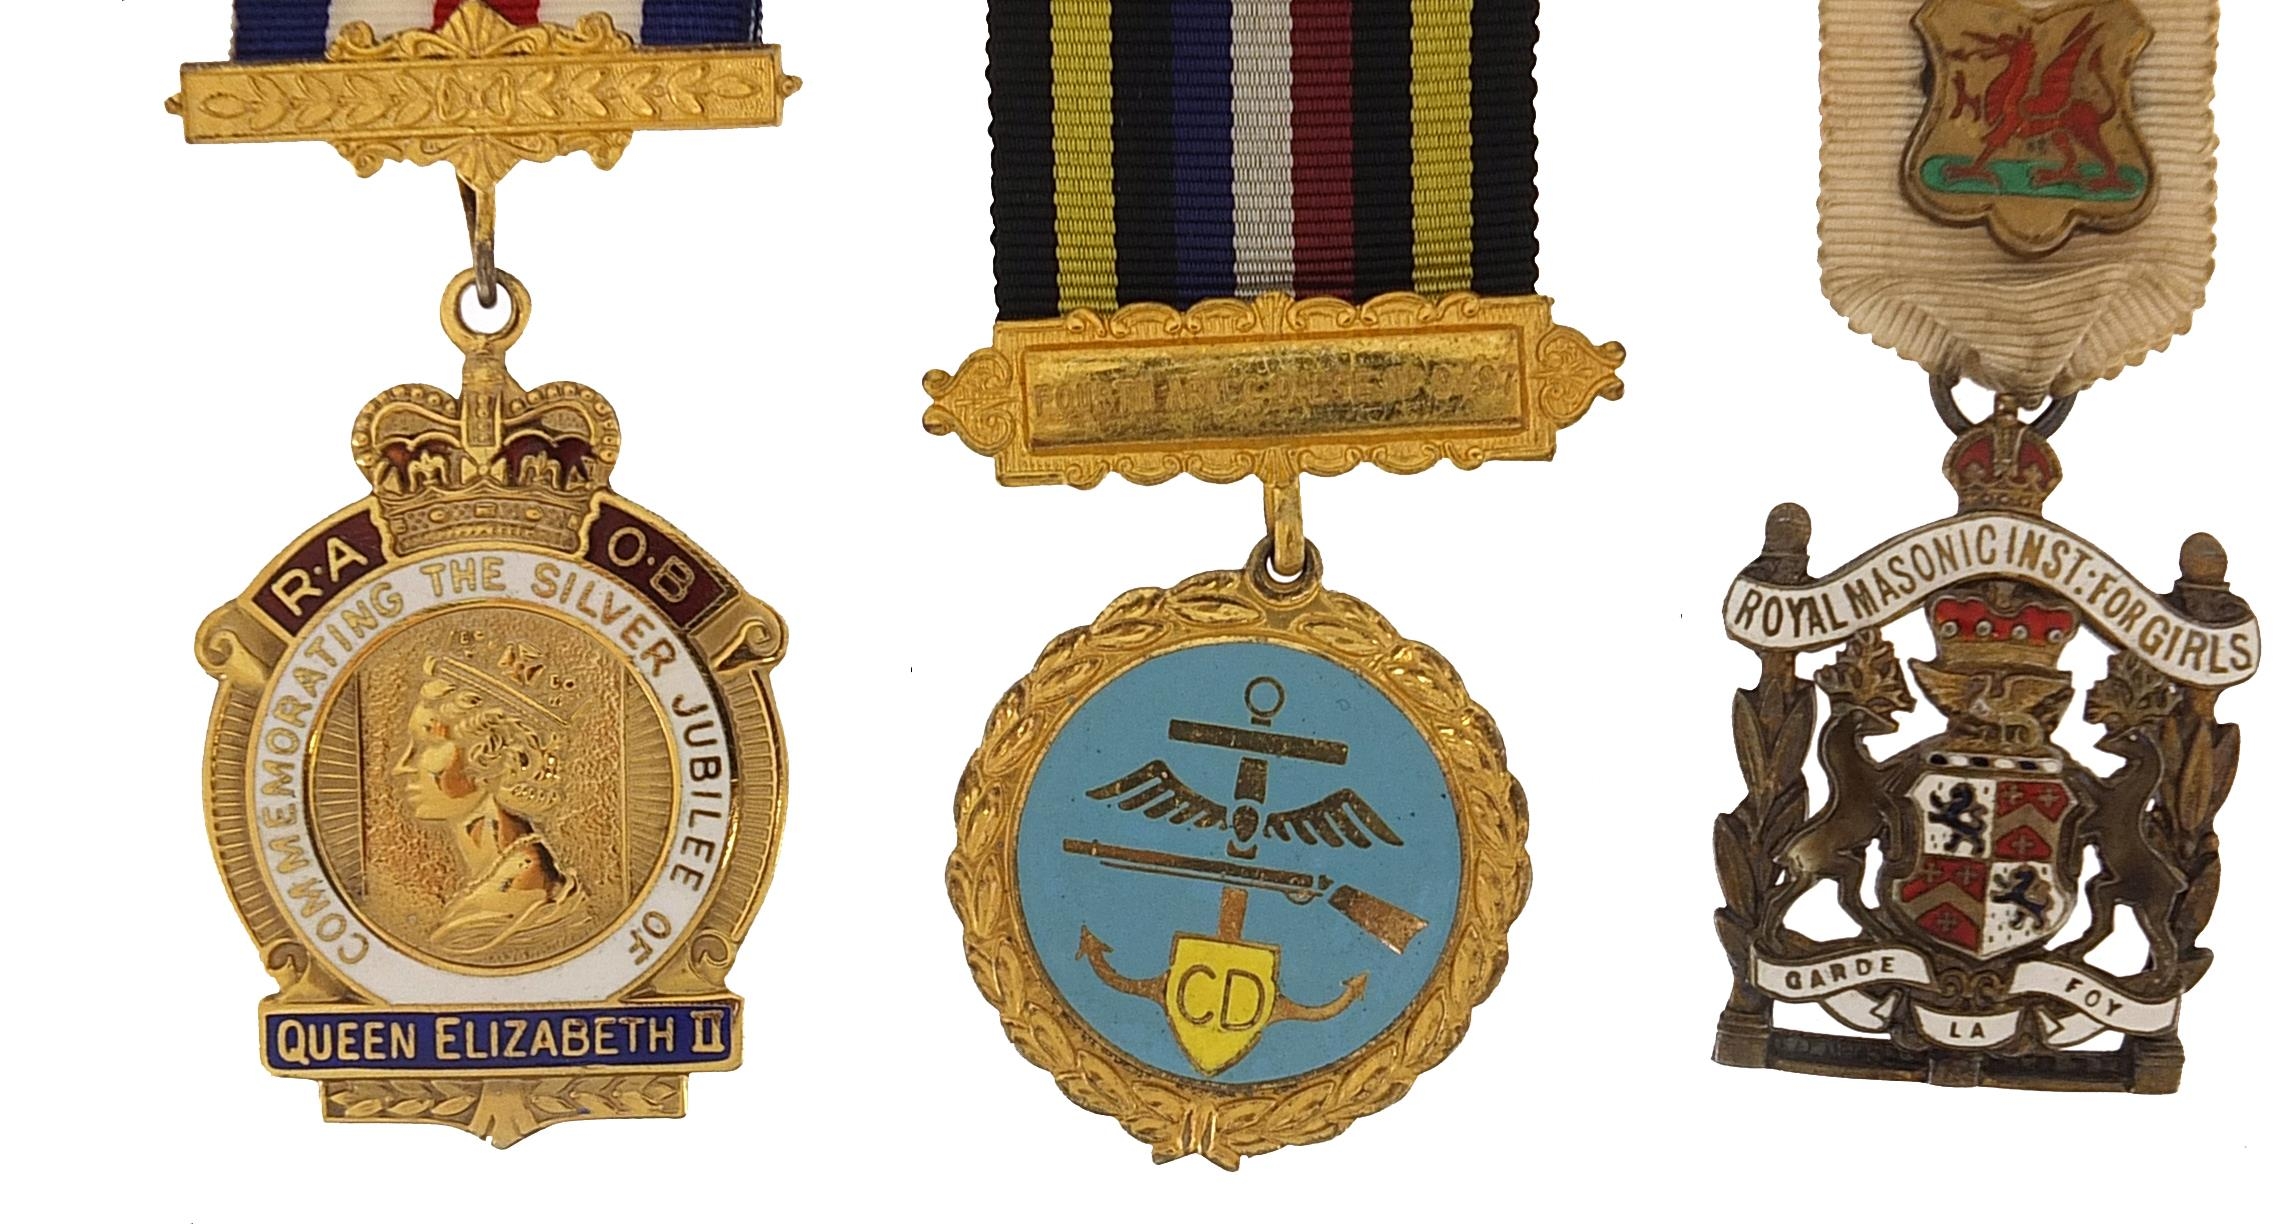 Two silver gilt and enamel RAOB jewels and a silver gilt and enamel Royal Masonic Institution for - Image 2 of 4